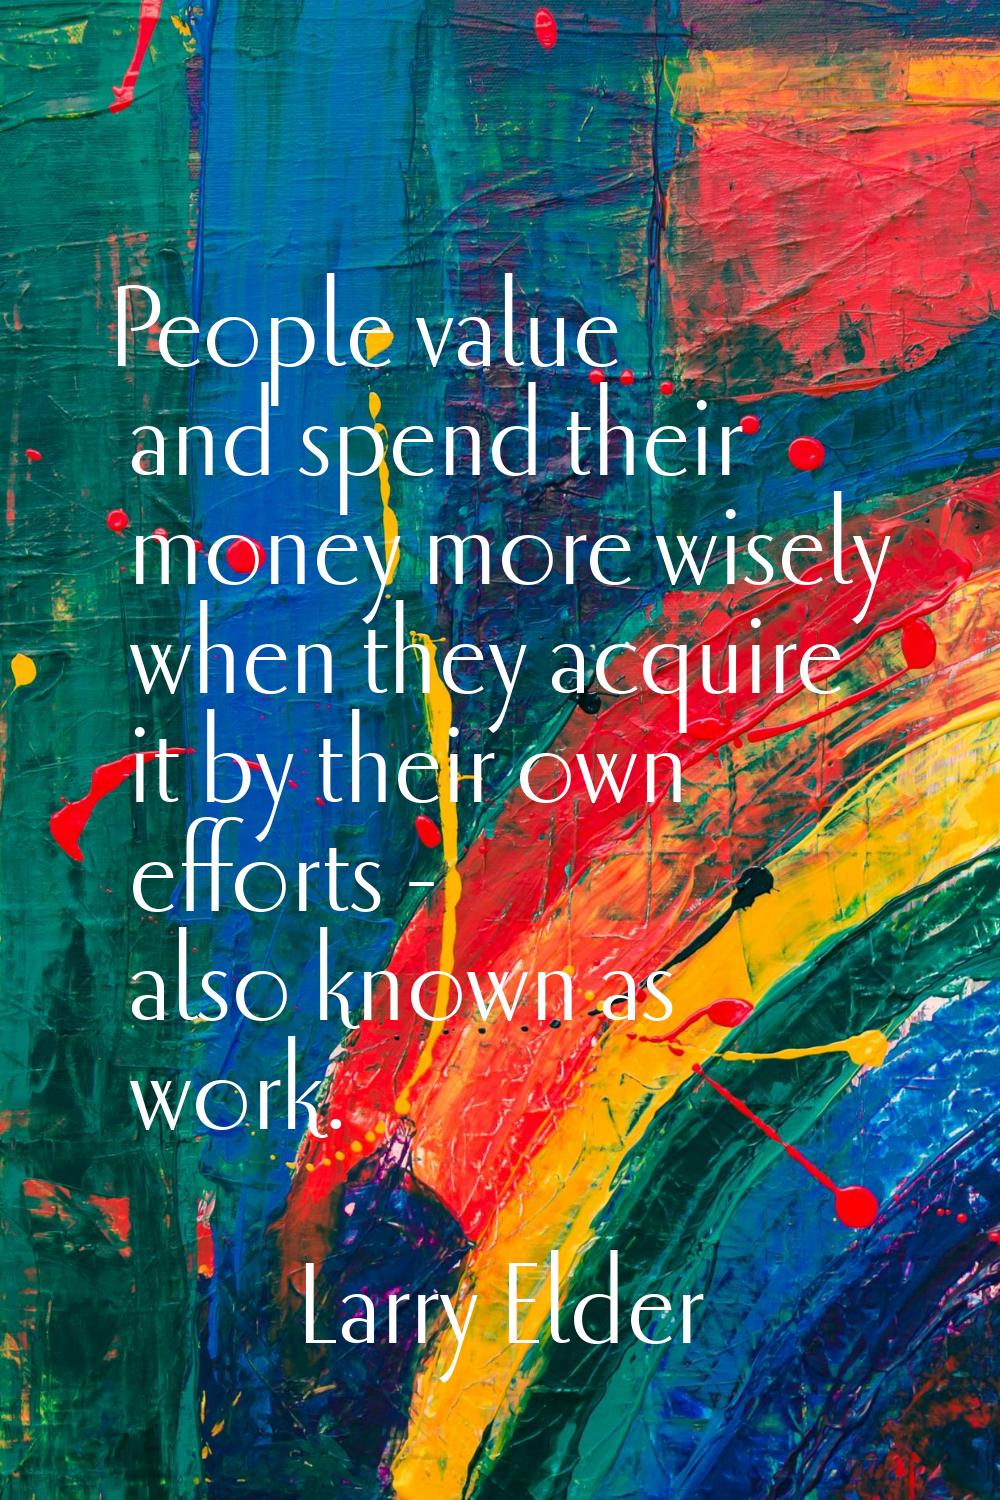 People value and spend their money more wisely when they acquire it by their own efforts - also kno